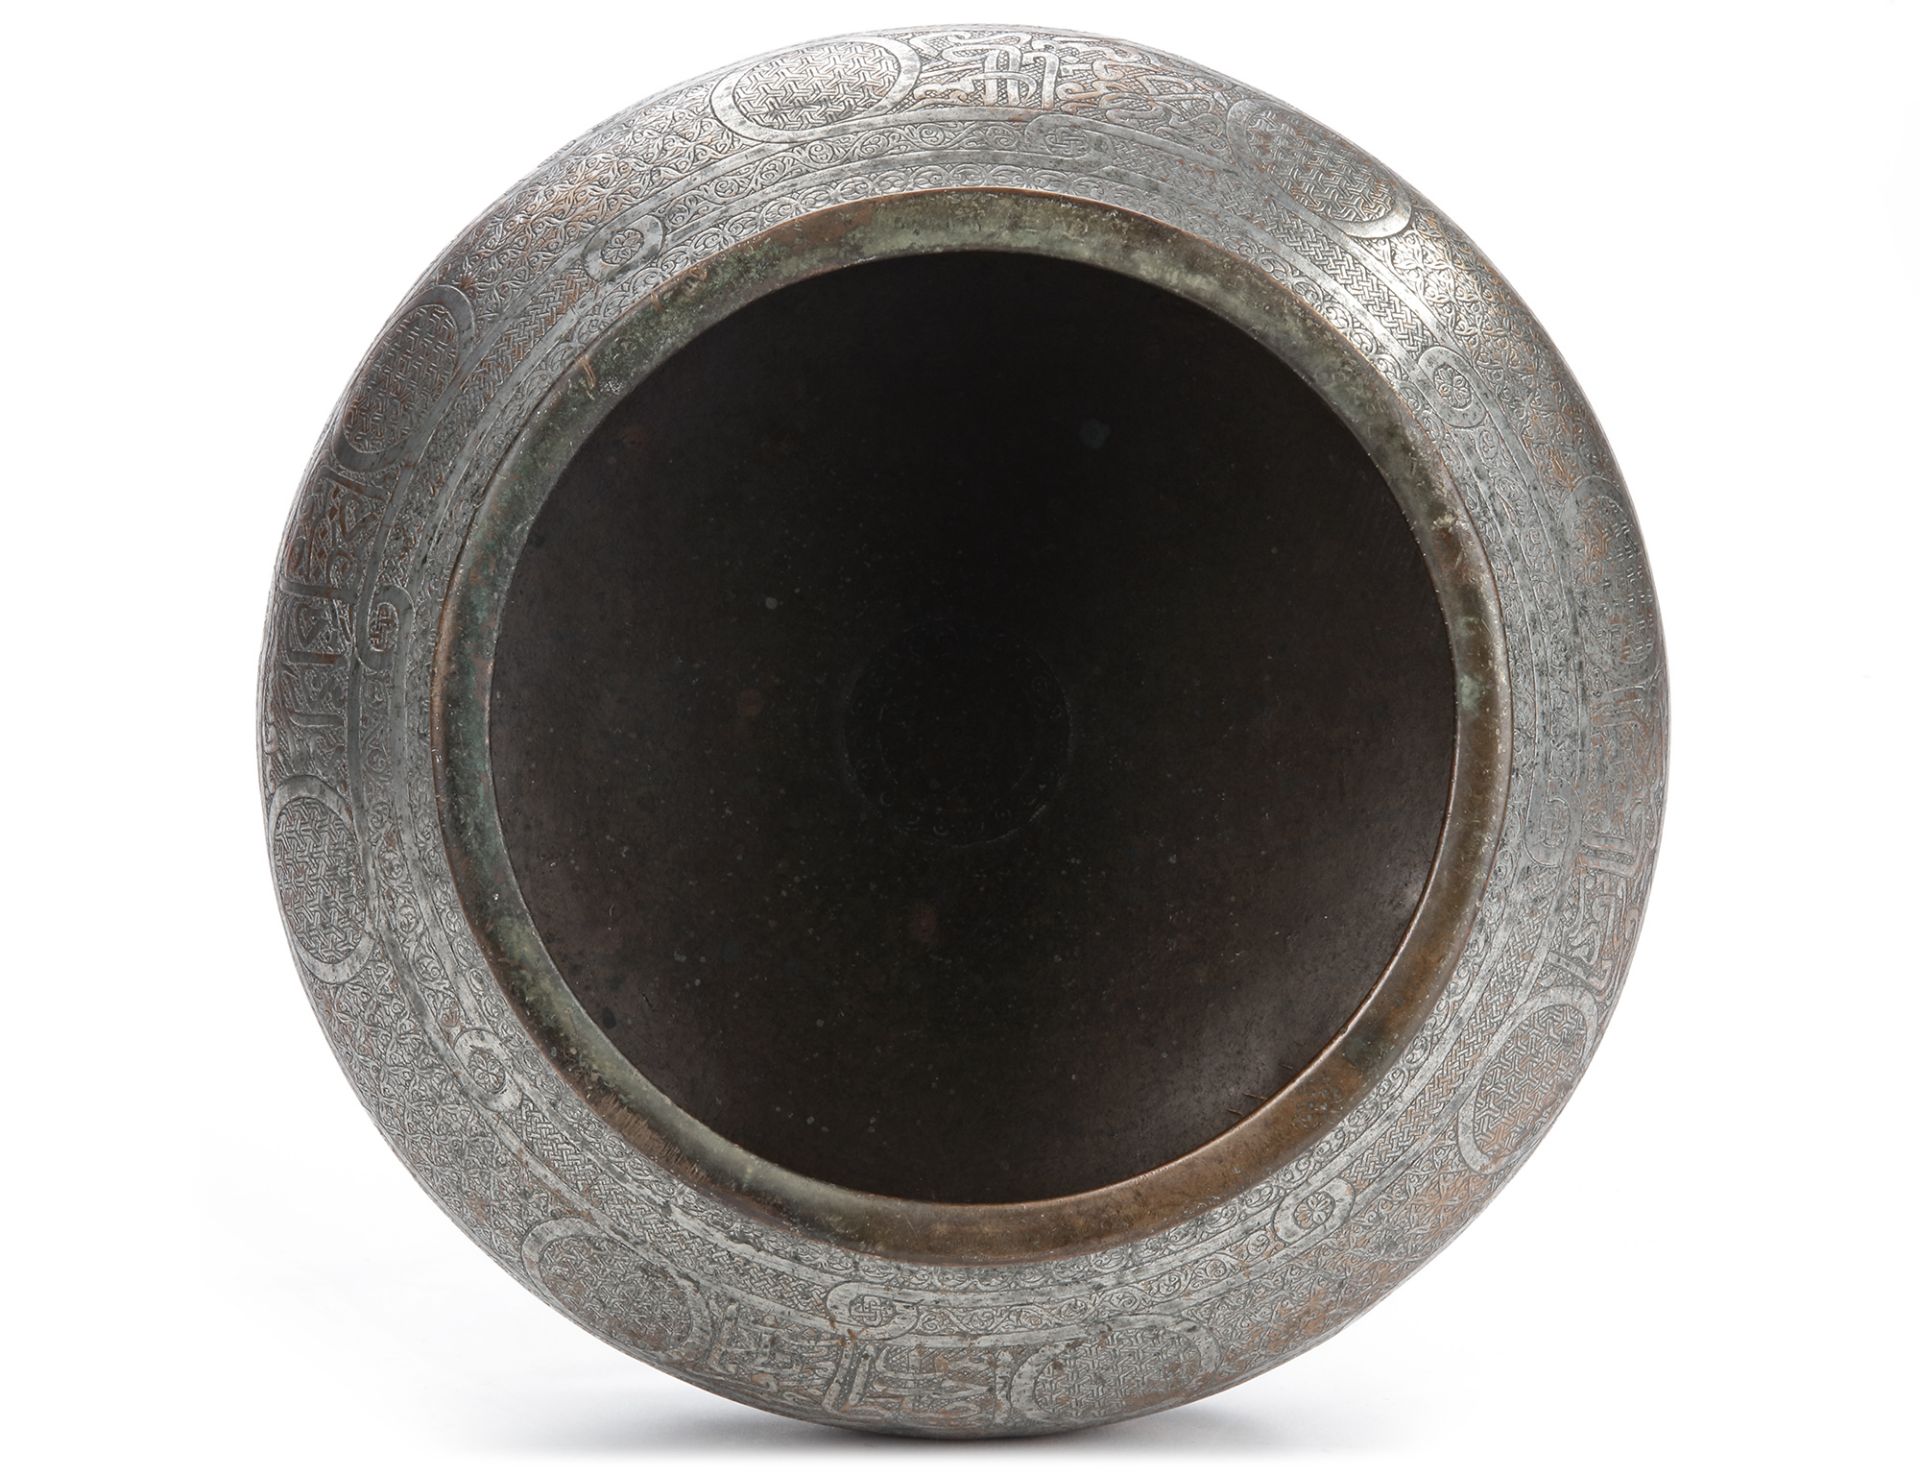 A TIMURID TINNED COPPER BOWL PERSIA, LATE 14TH CENTURY - Image 3 of 4